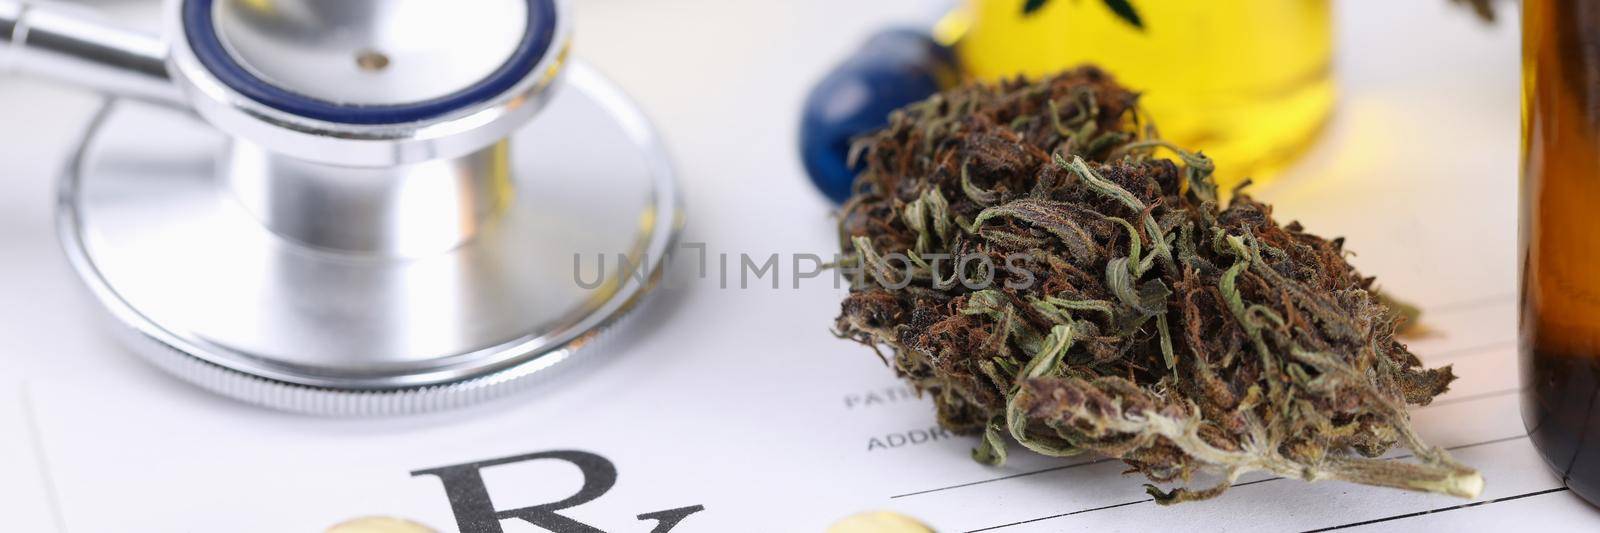 Medical prescription and narcotic drugs lying on table closeup. Narcotic drugs in medicine concept